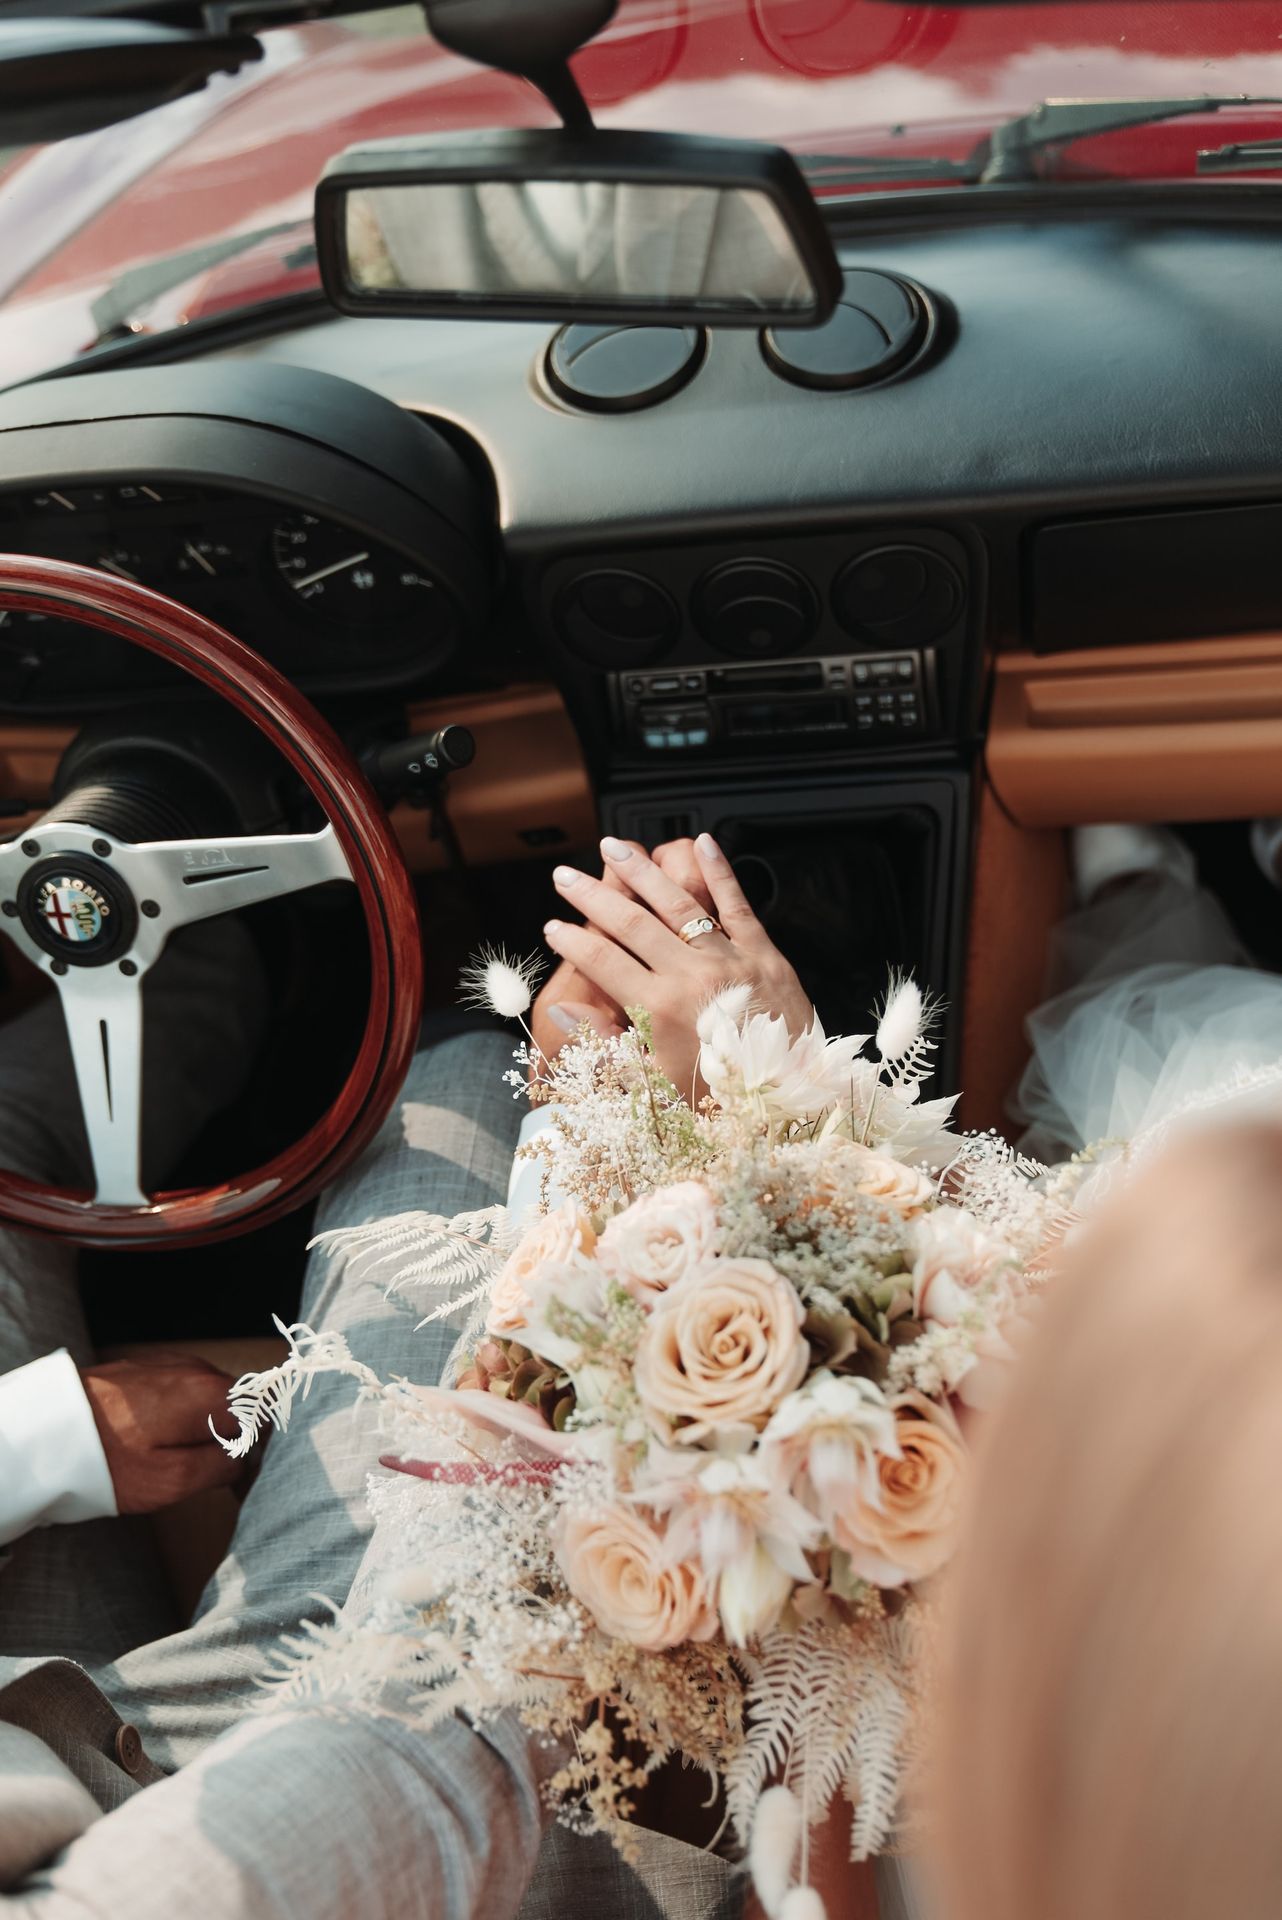 a person holding flowers in a car